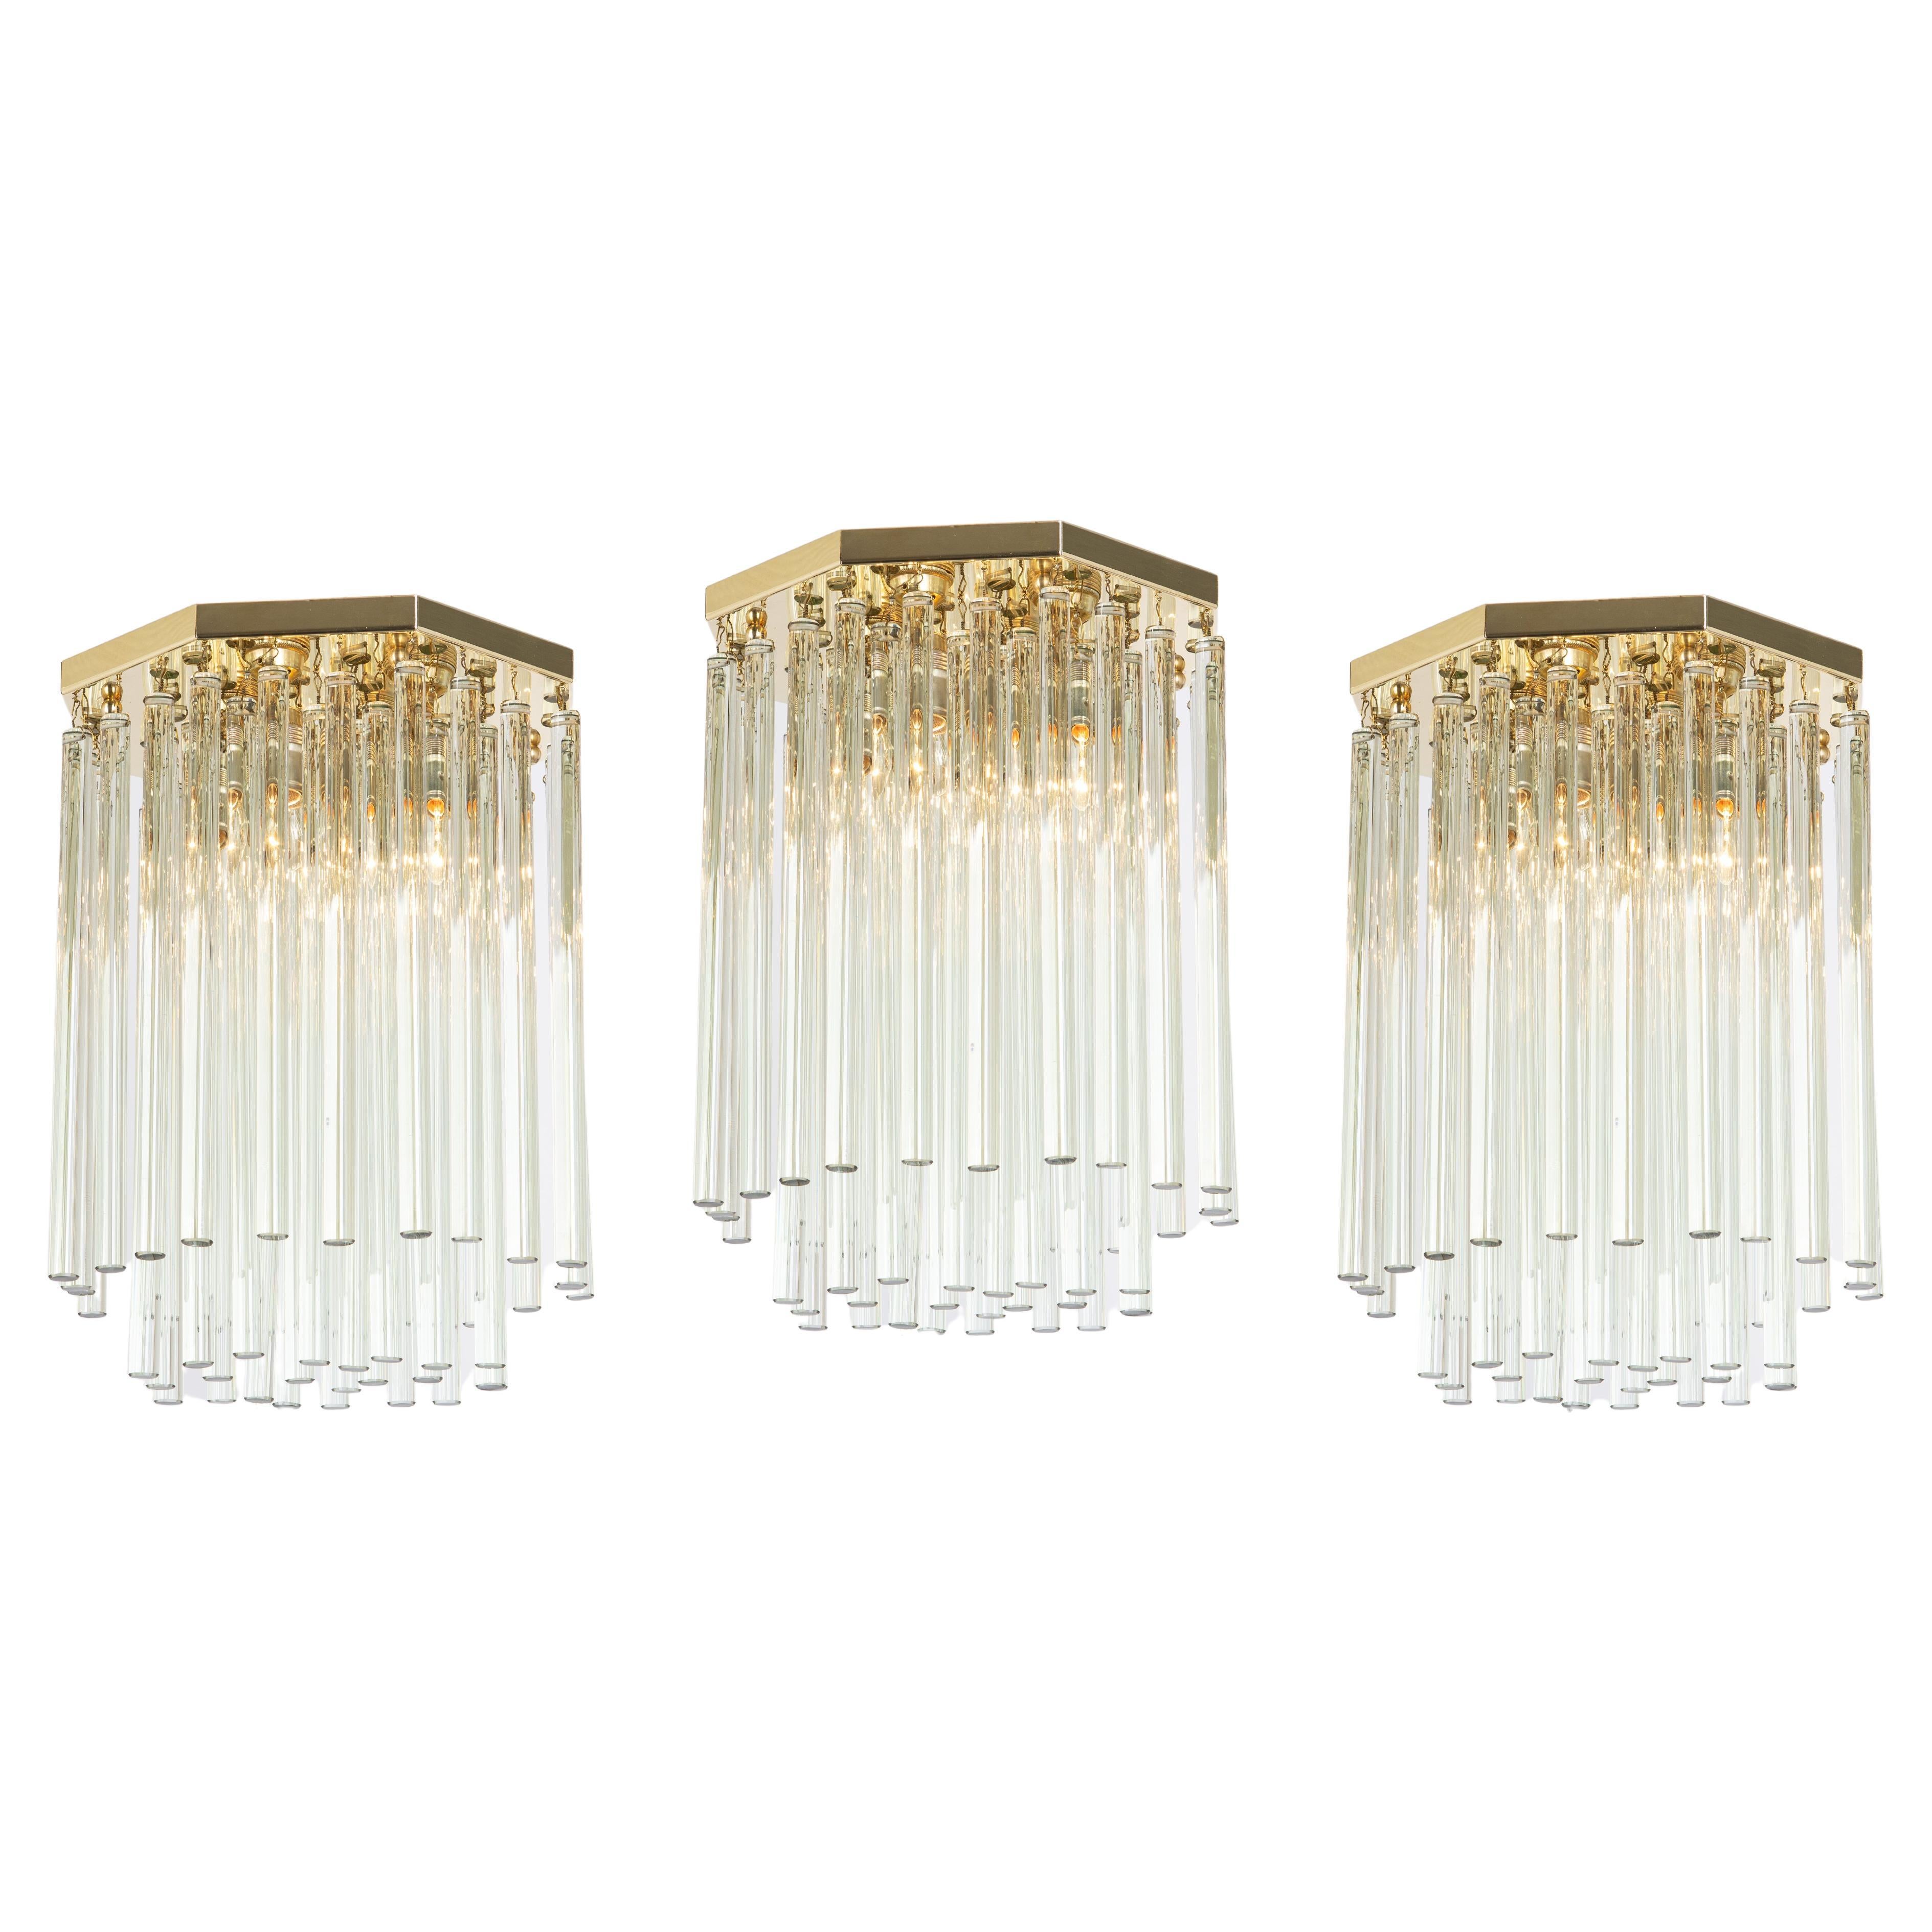 1 of 3 Brass and Crystal Glass Rods Flush mount light by C.Palme, Germany, 1970s For Sale